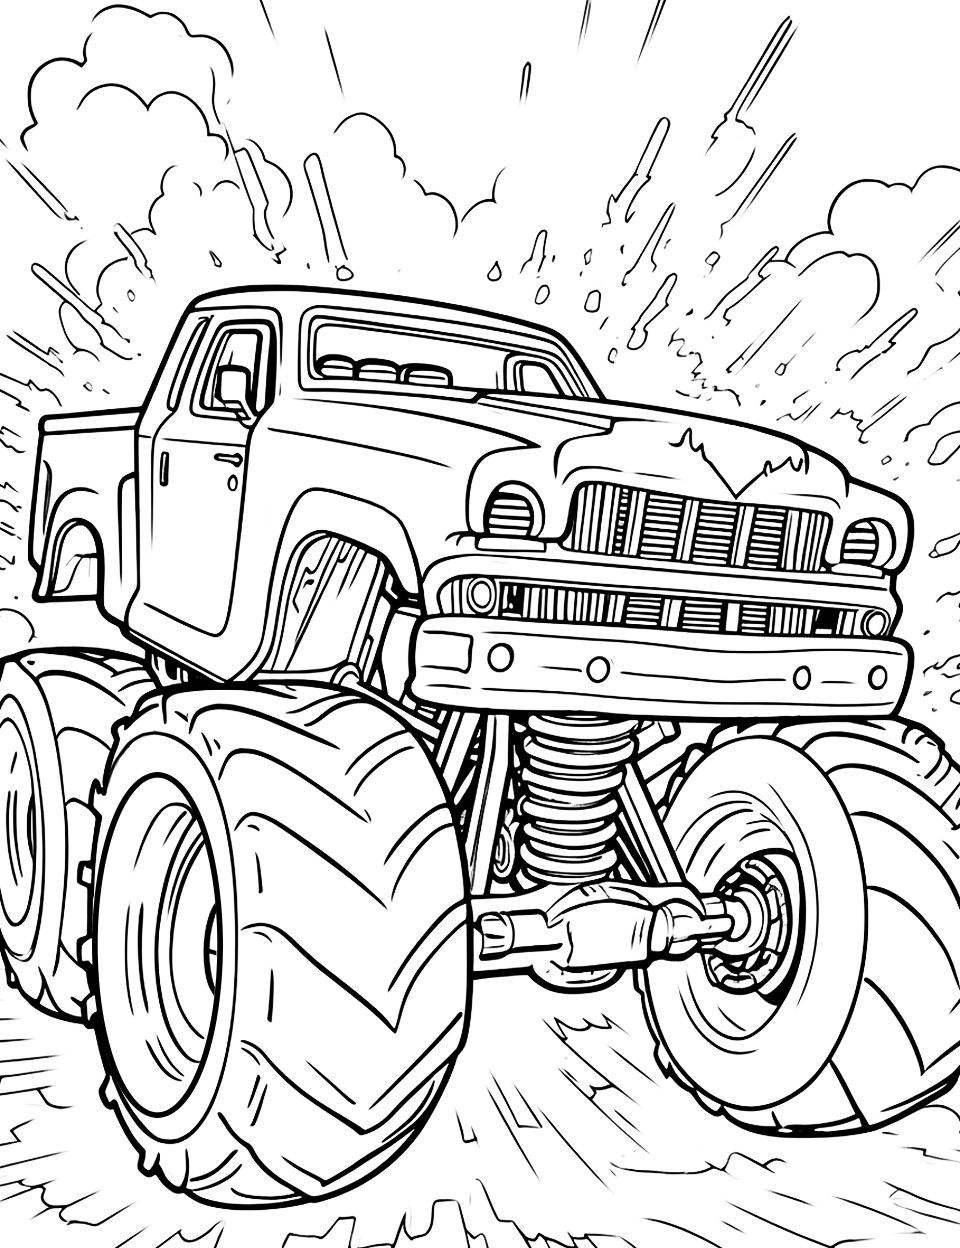 Hot Wheels Monster Truck Coloring Page - A detailed Hot Wheels monster truck zooming through a field.